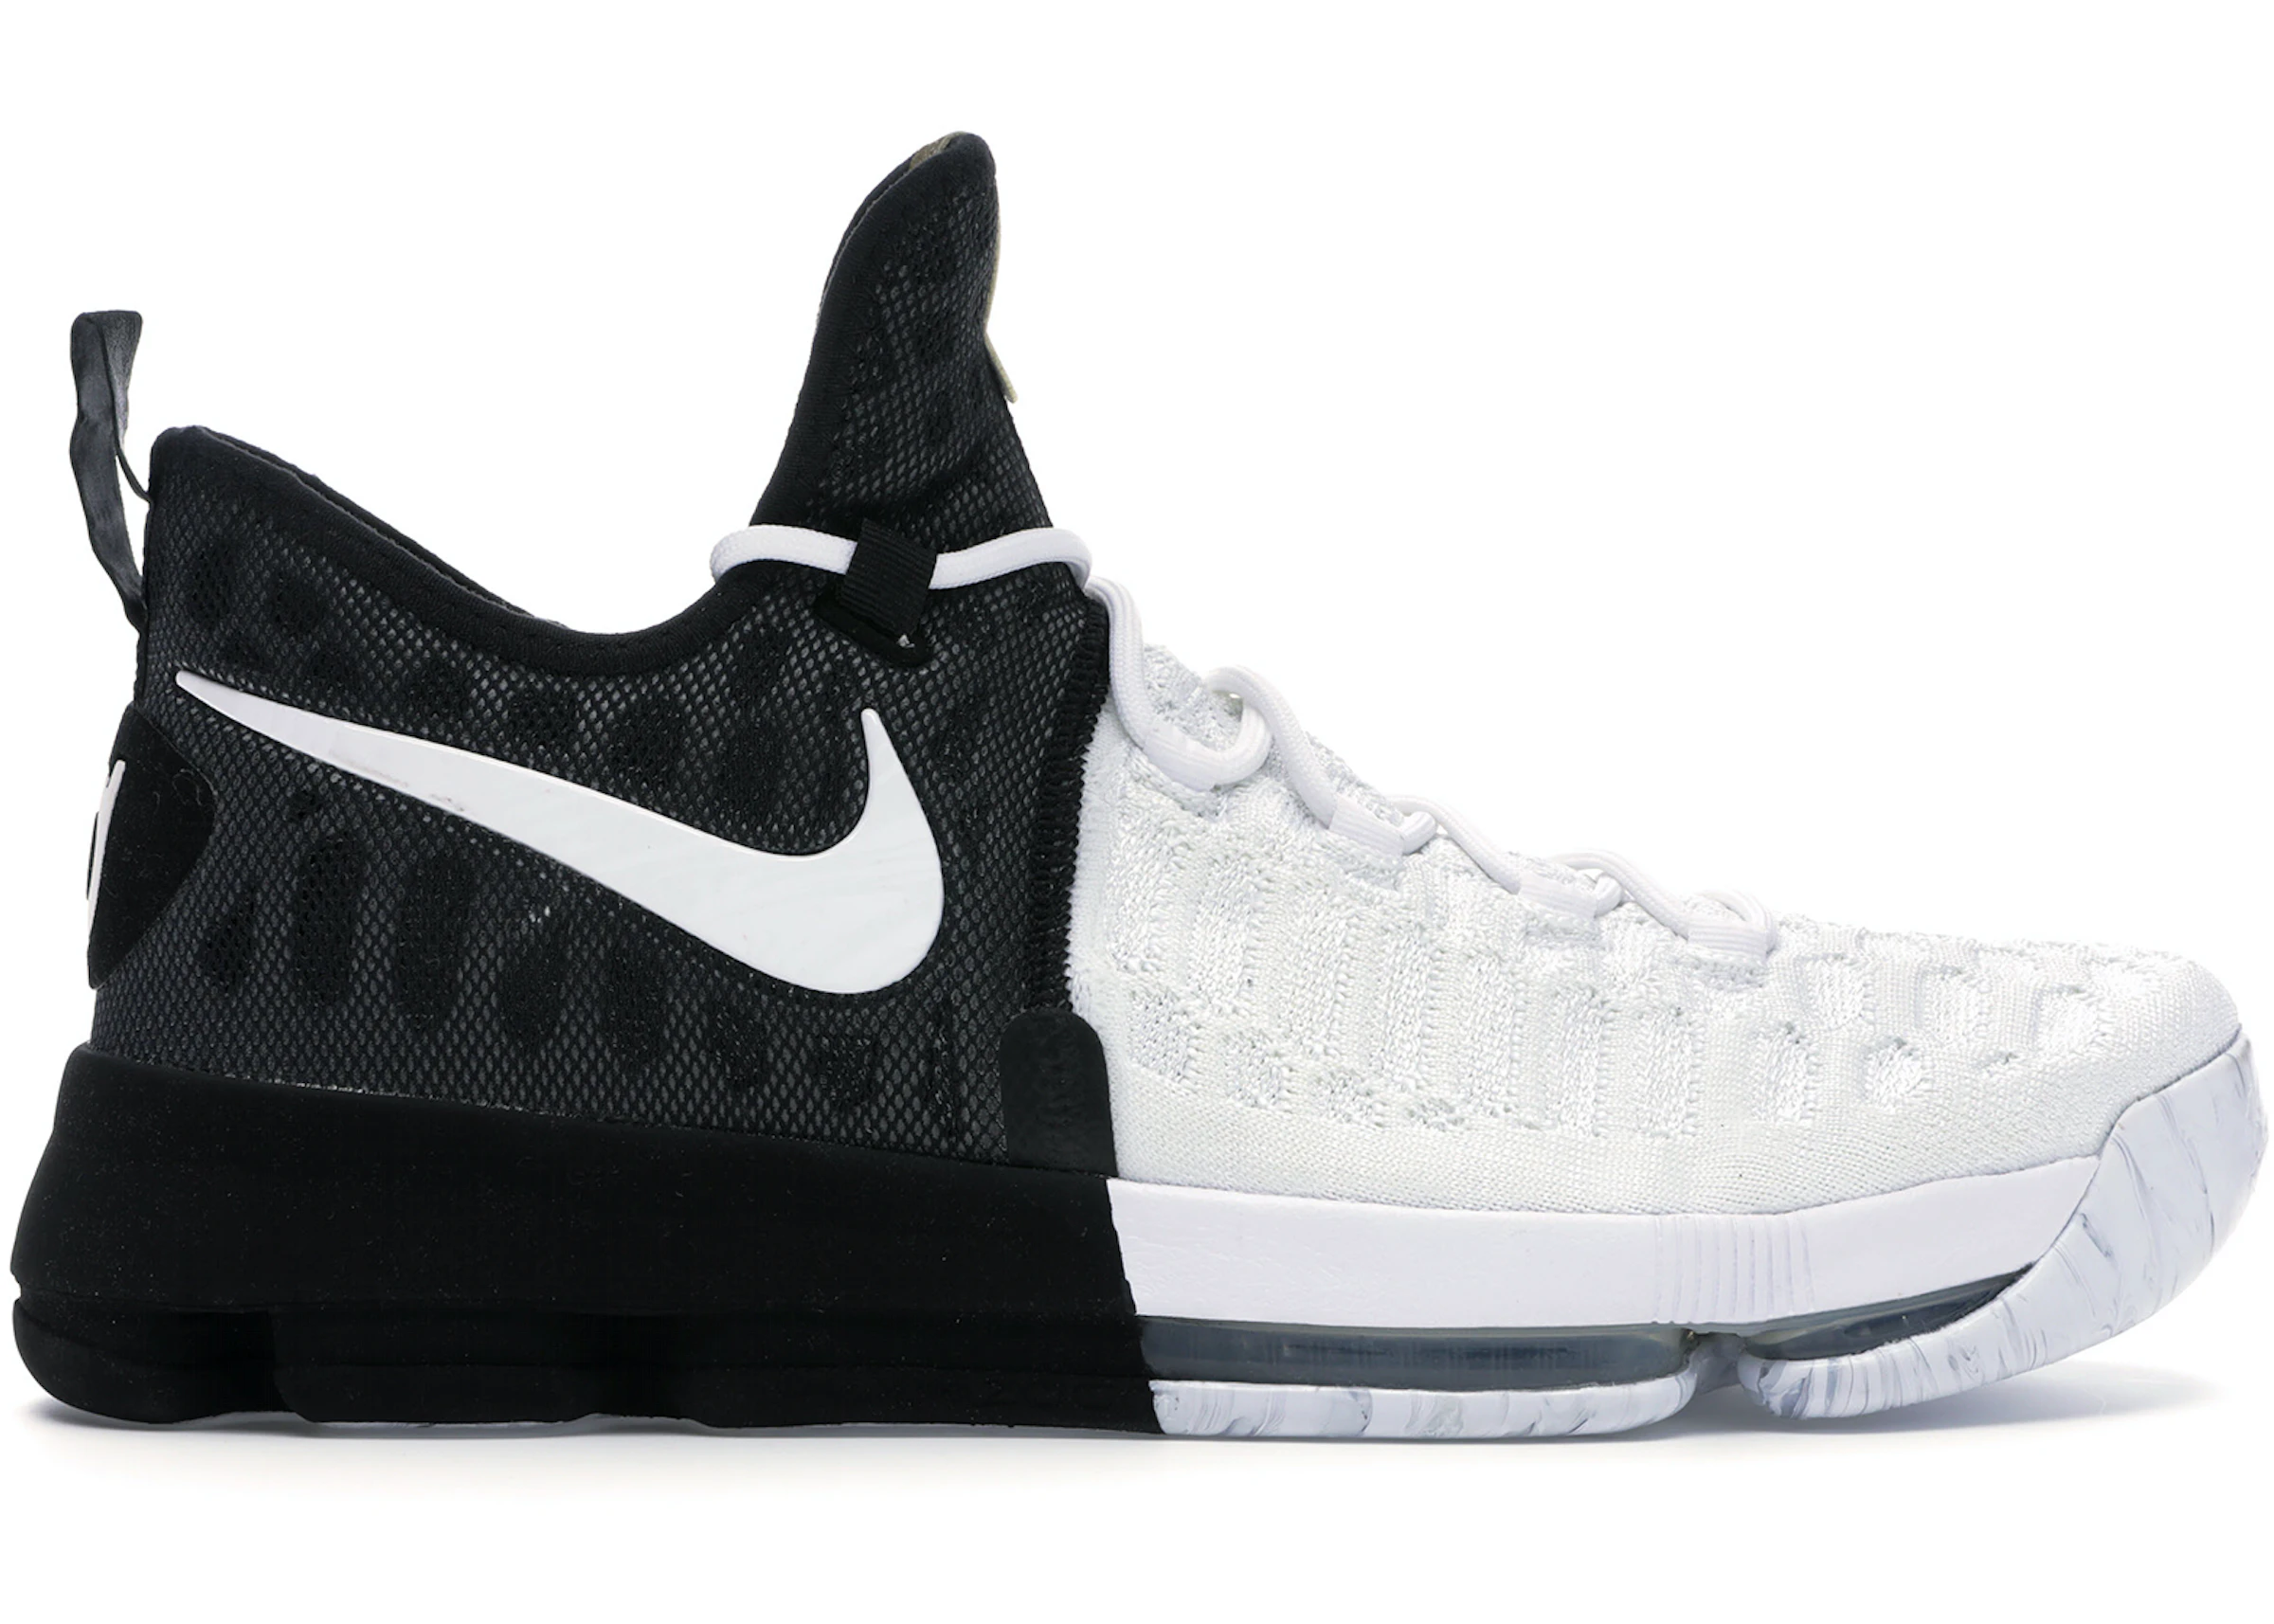 Buy Nike kd 9 grey KD 9 Shoes & New Sneakers - StockX